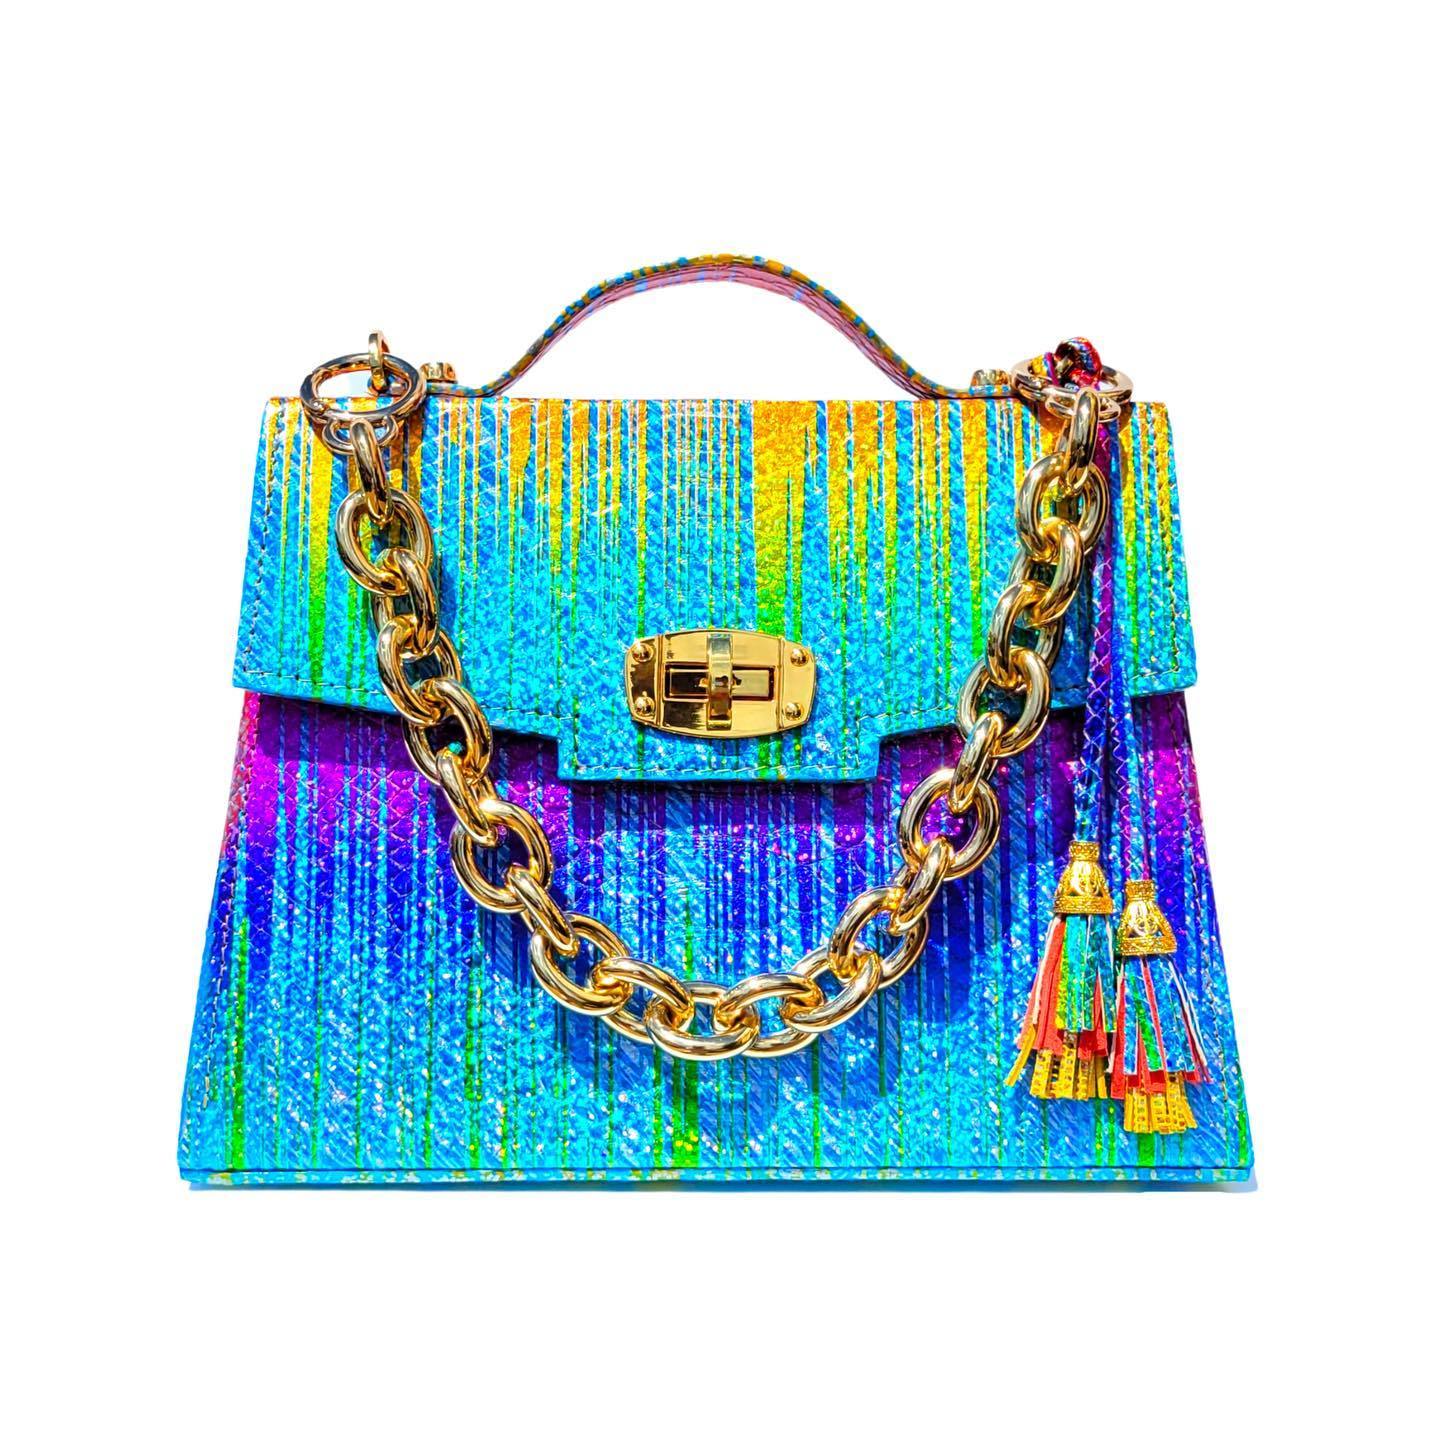 Most BSwanky handbag sales are in the $3,800 to $4,500 range. 